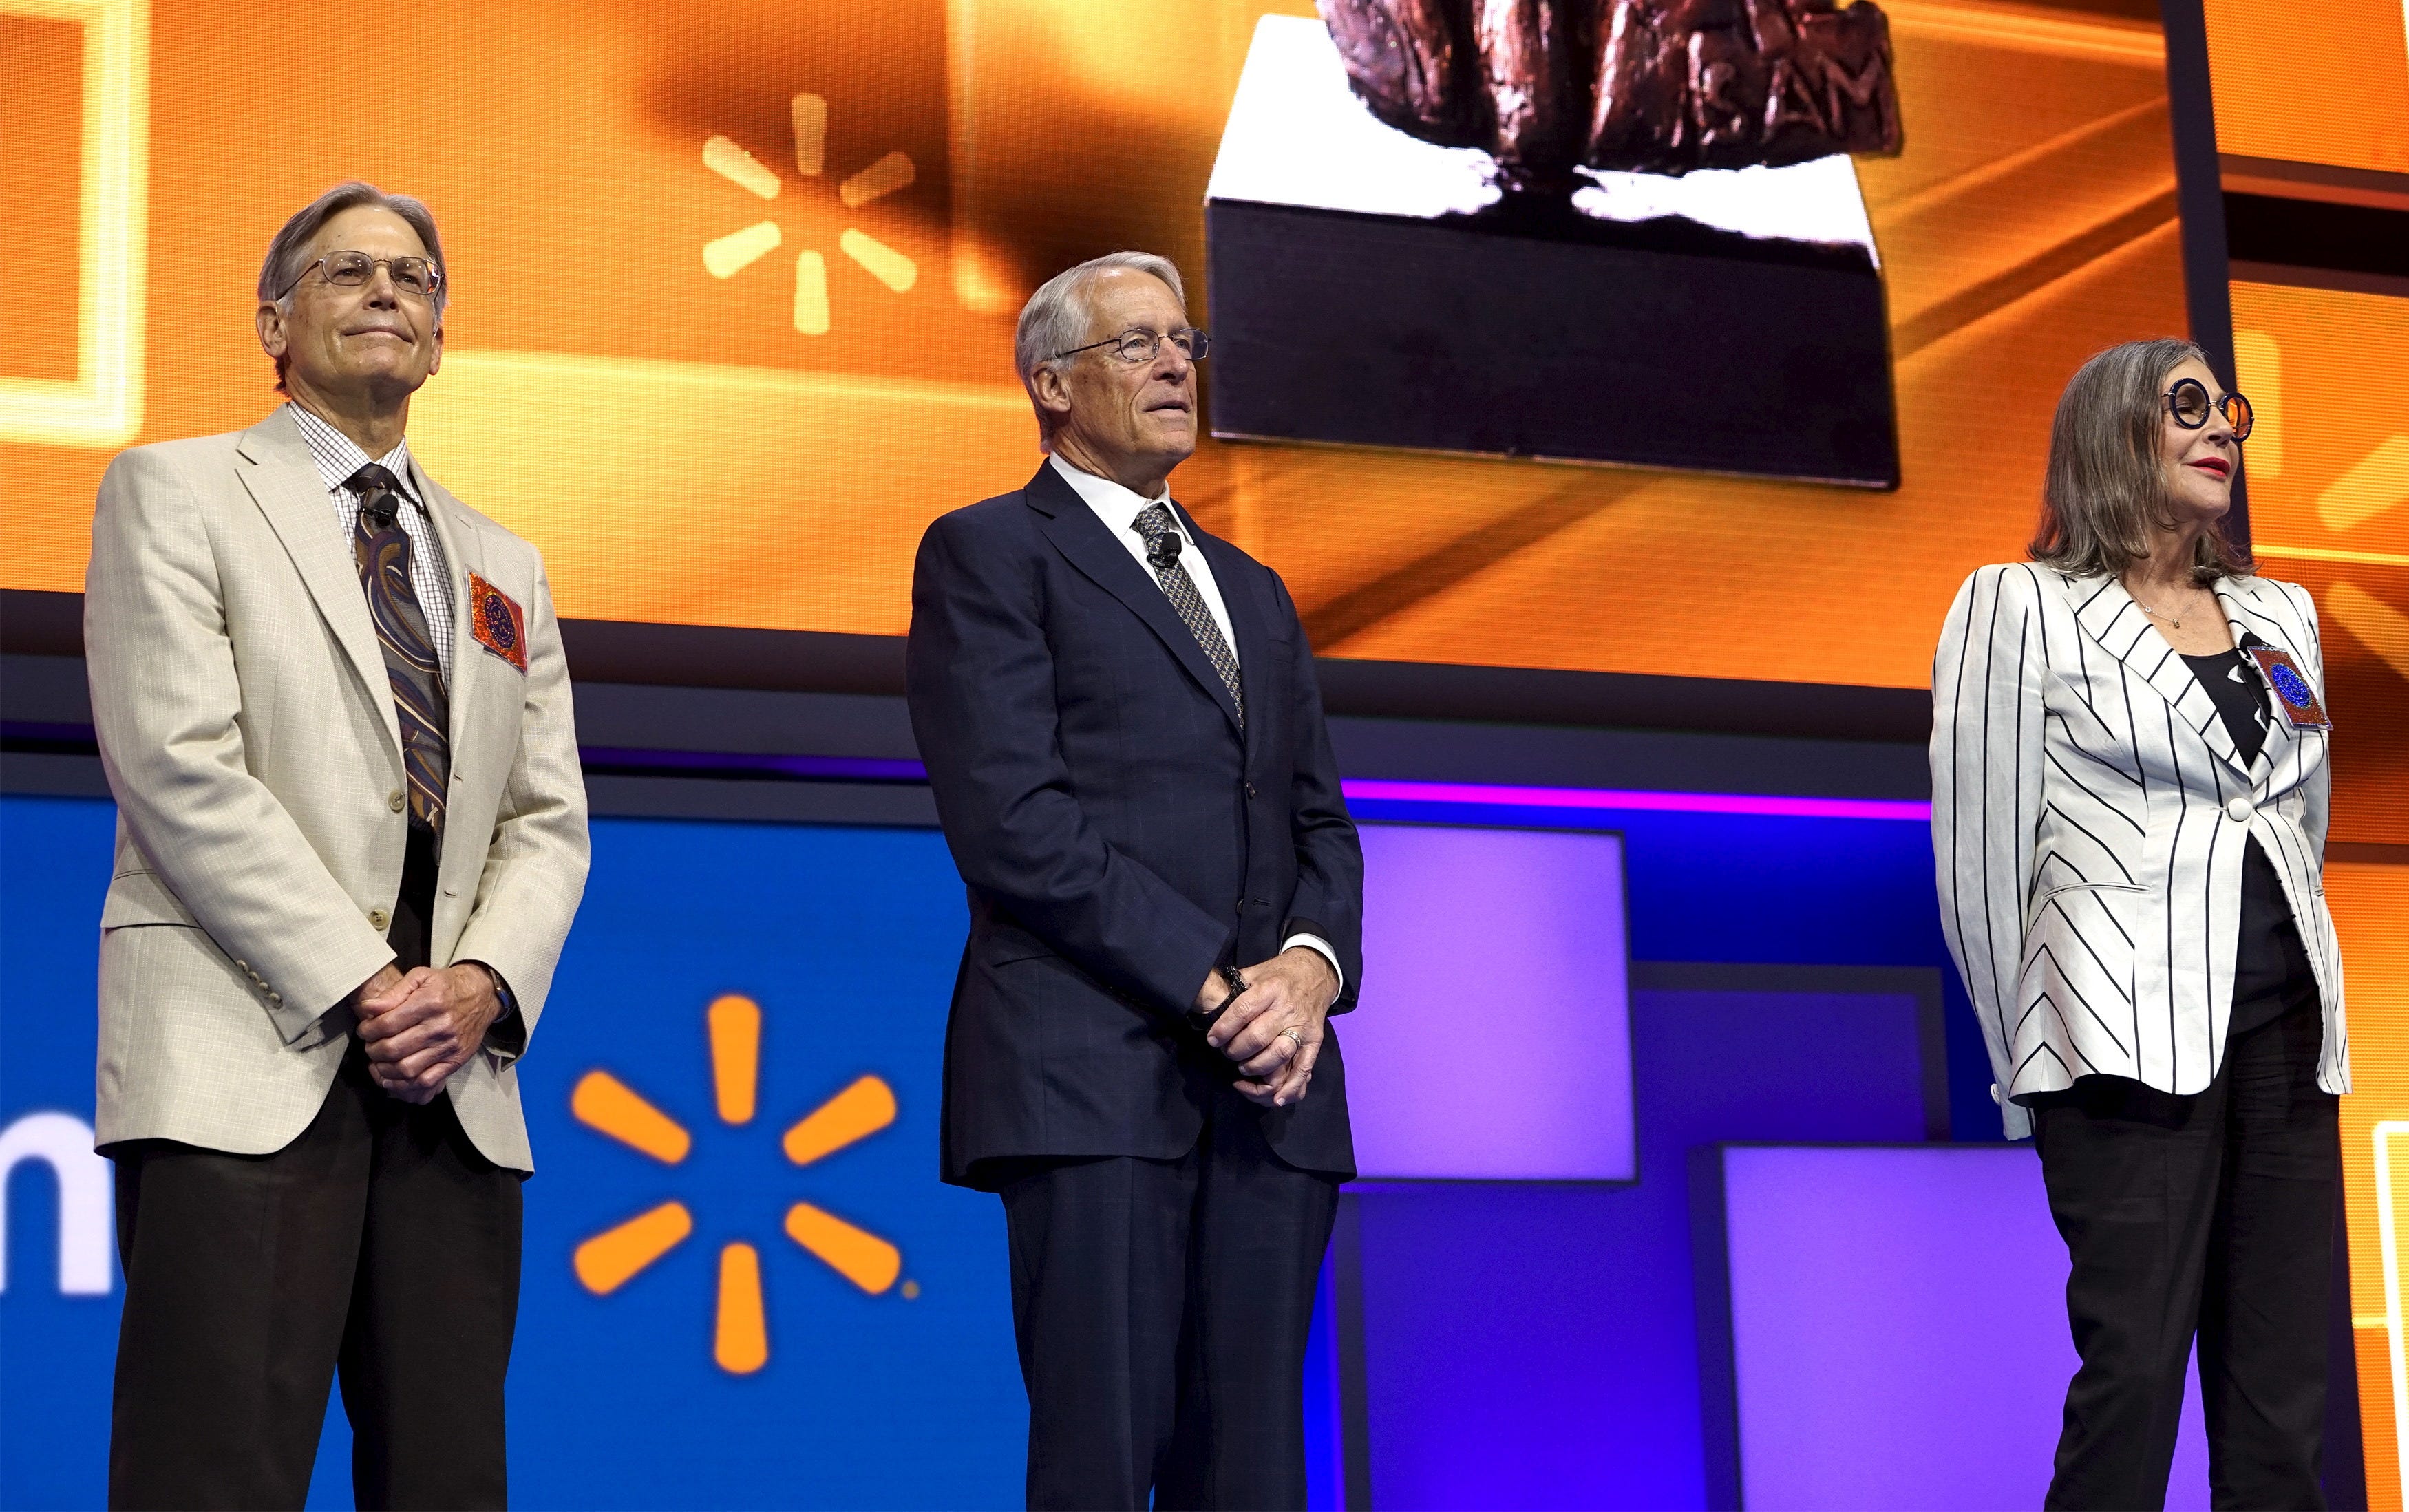 Jim, Rob, and Alice Walton have a combined net worth of over $170 billion. Rick Wilking/Reuters